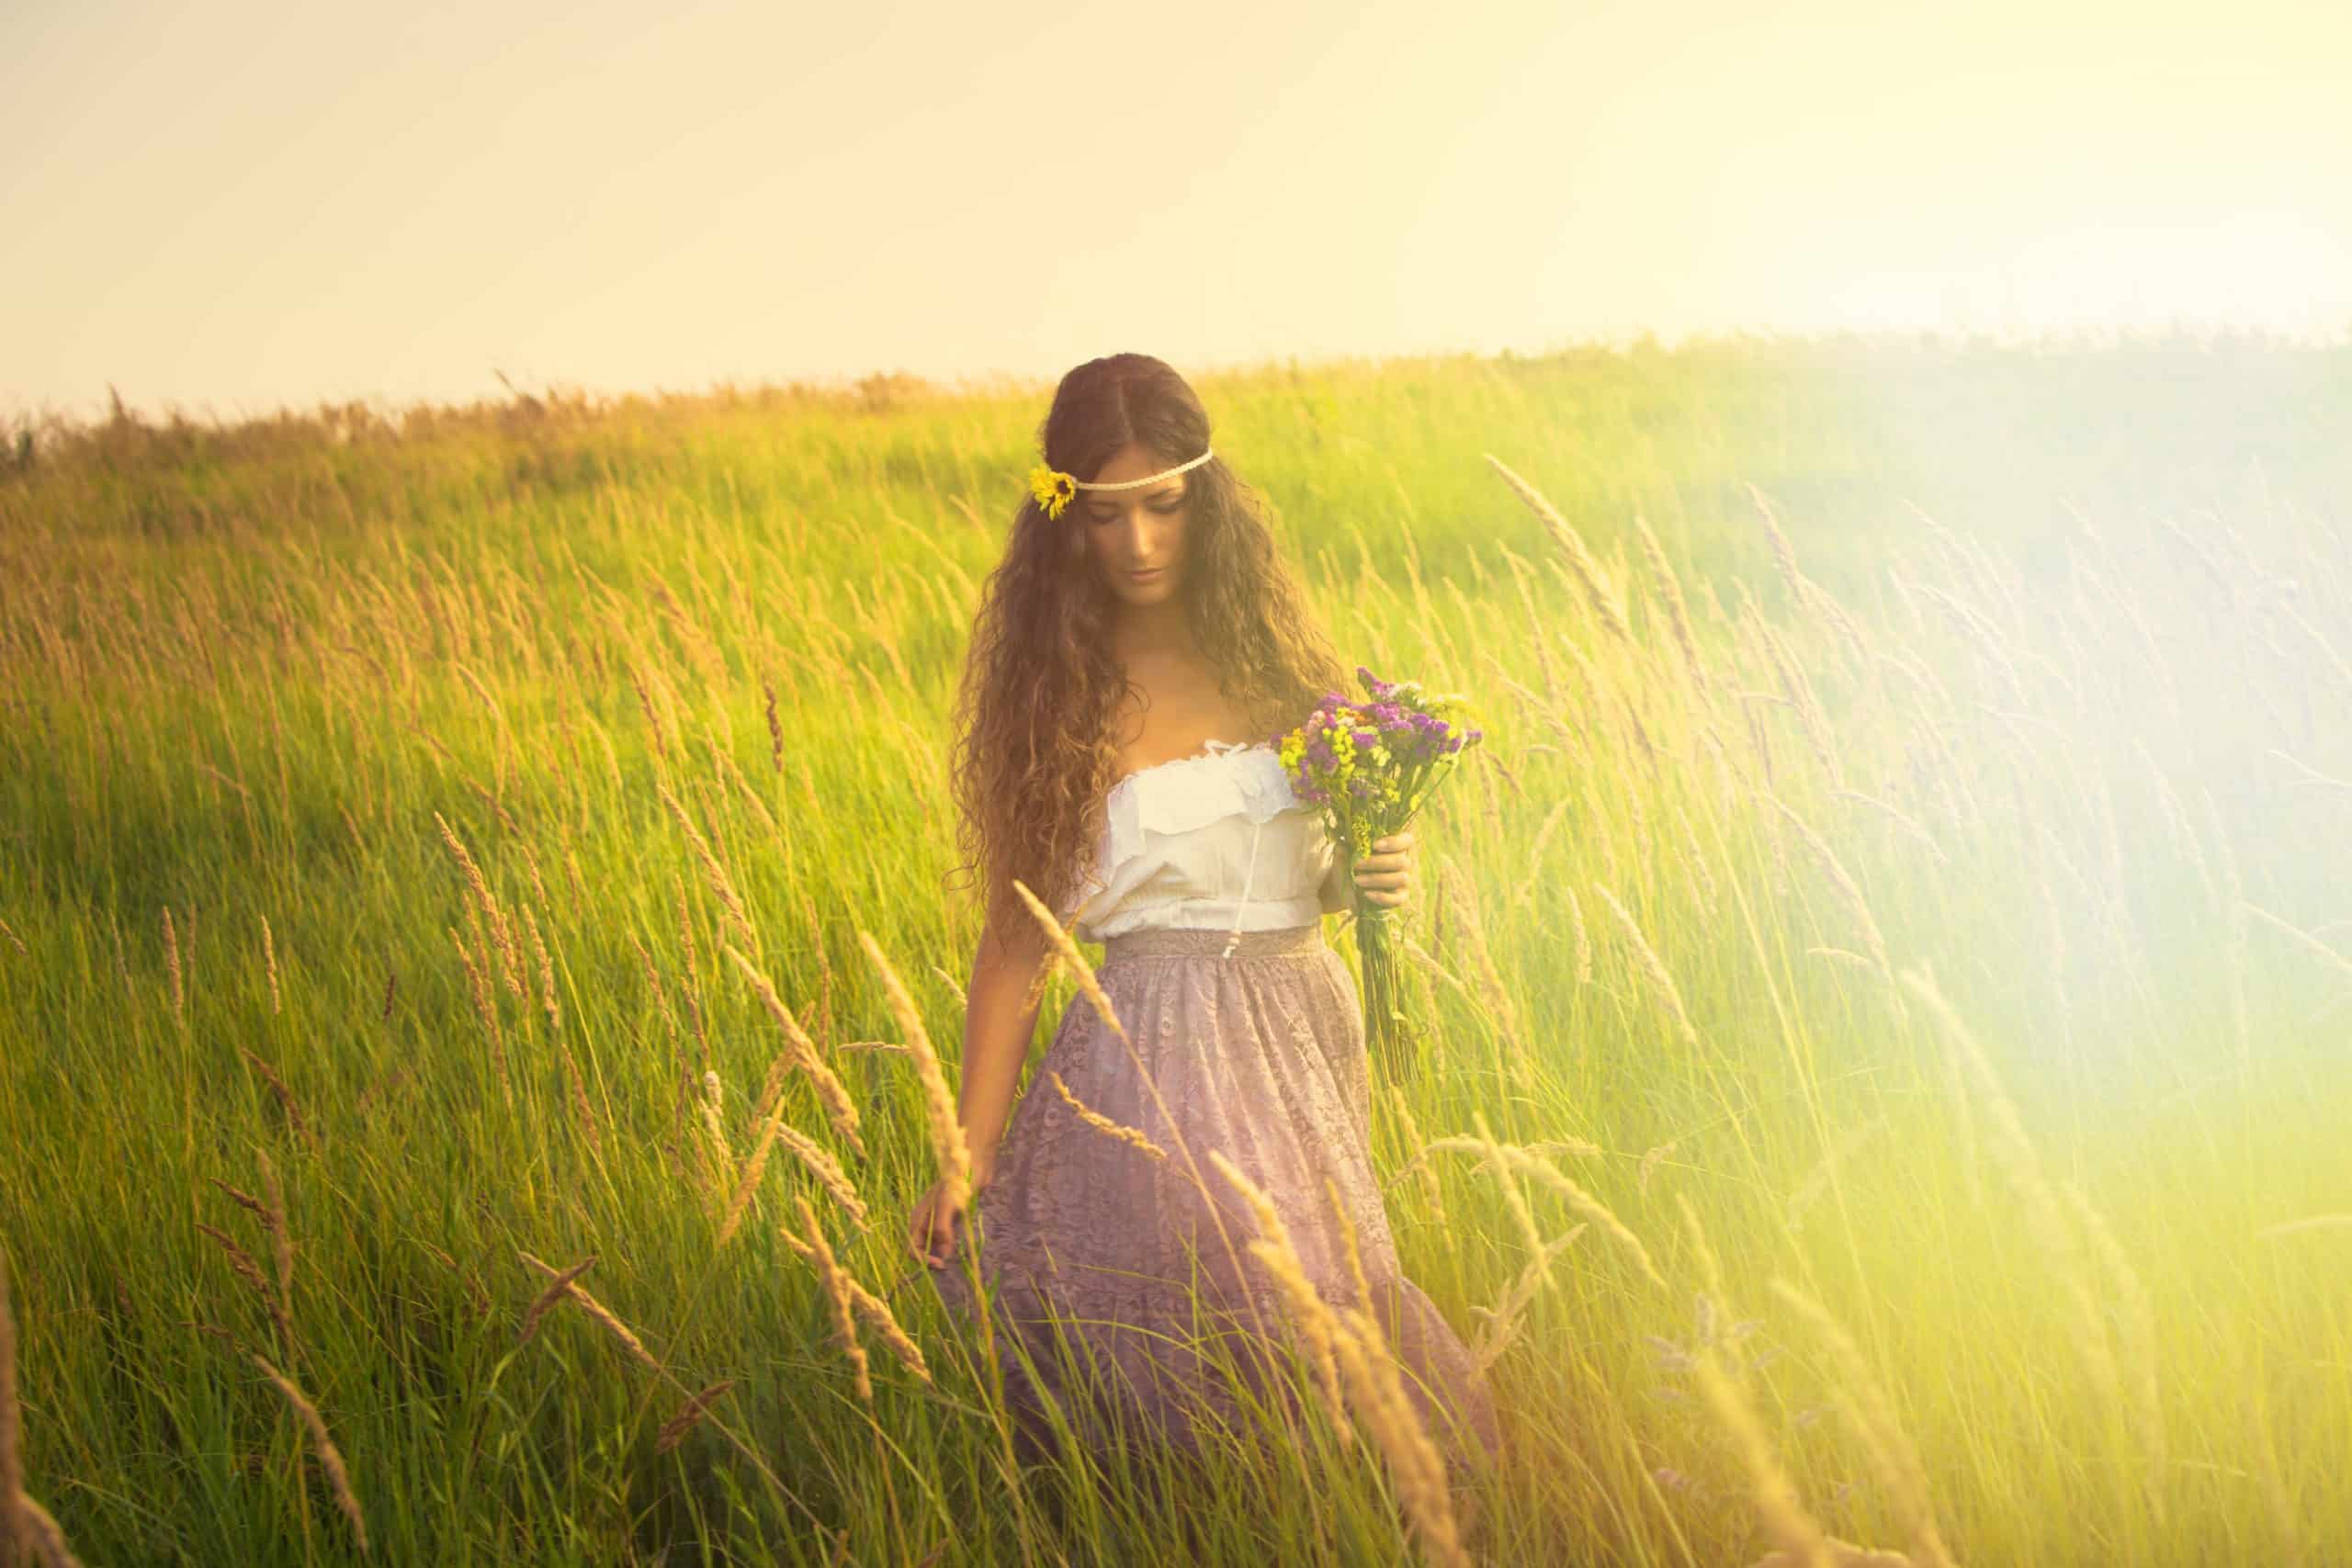 Young beautiful woman with long curly hair hold in hand a bouquet of wild flowers walk in light at grass field